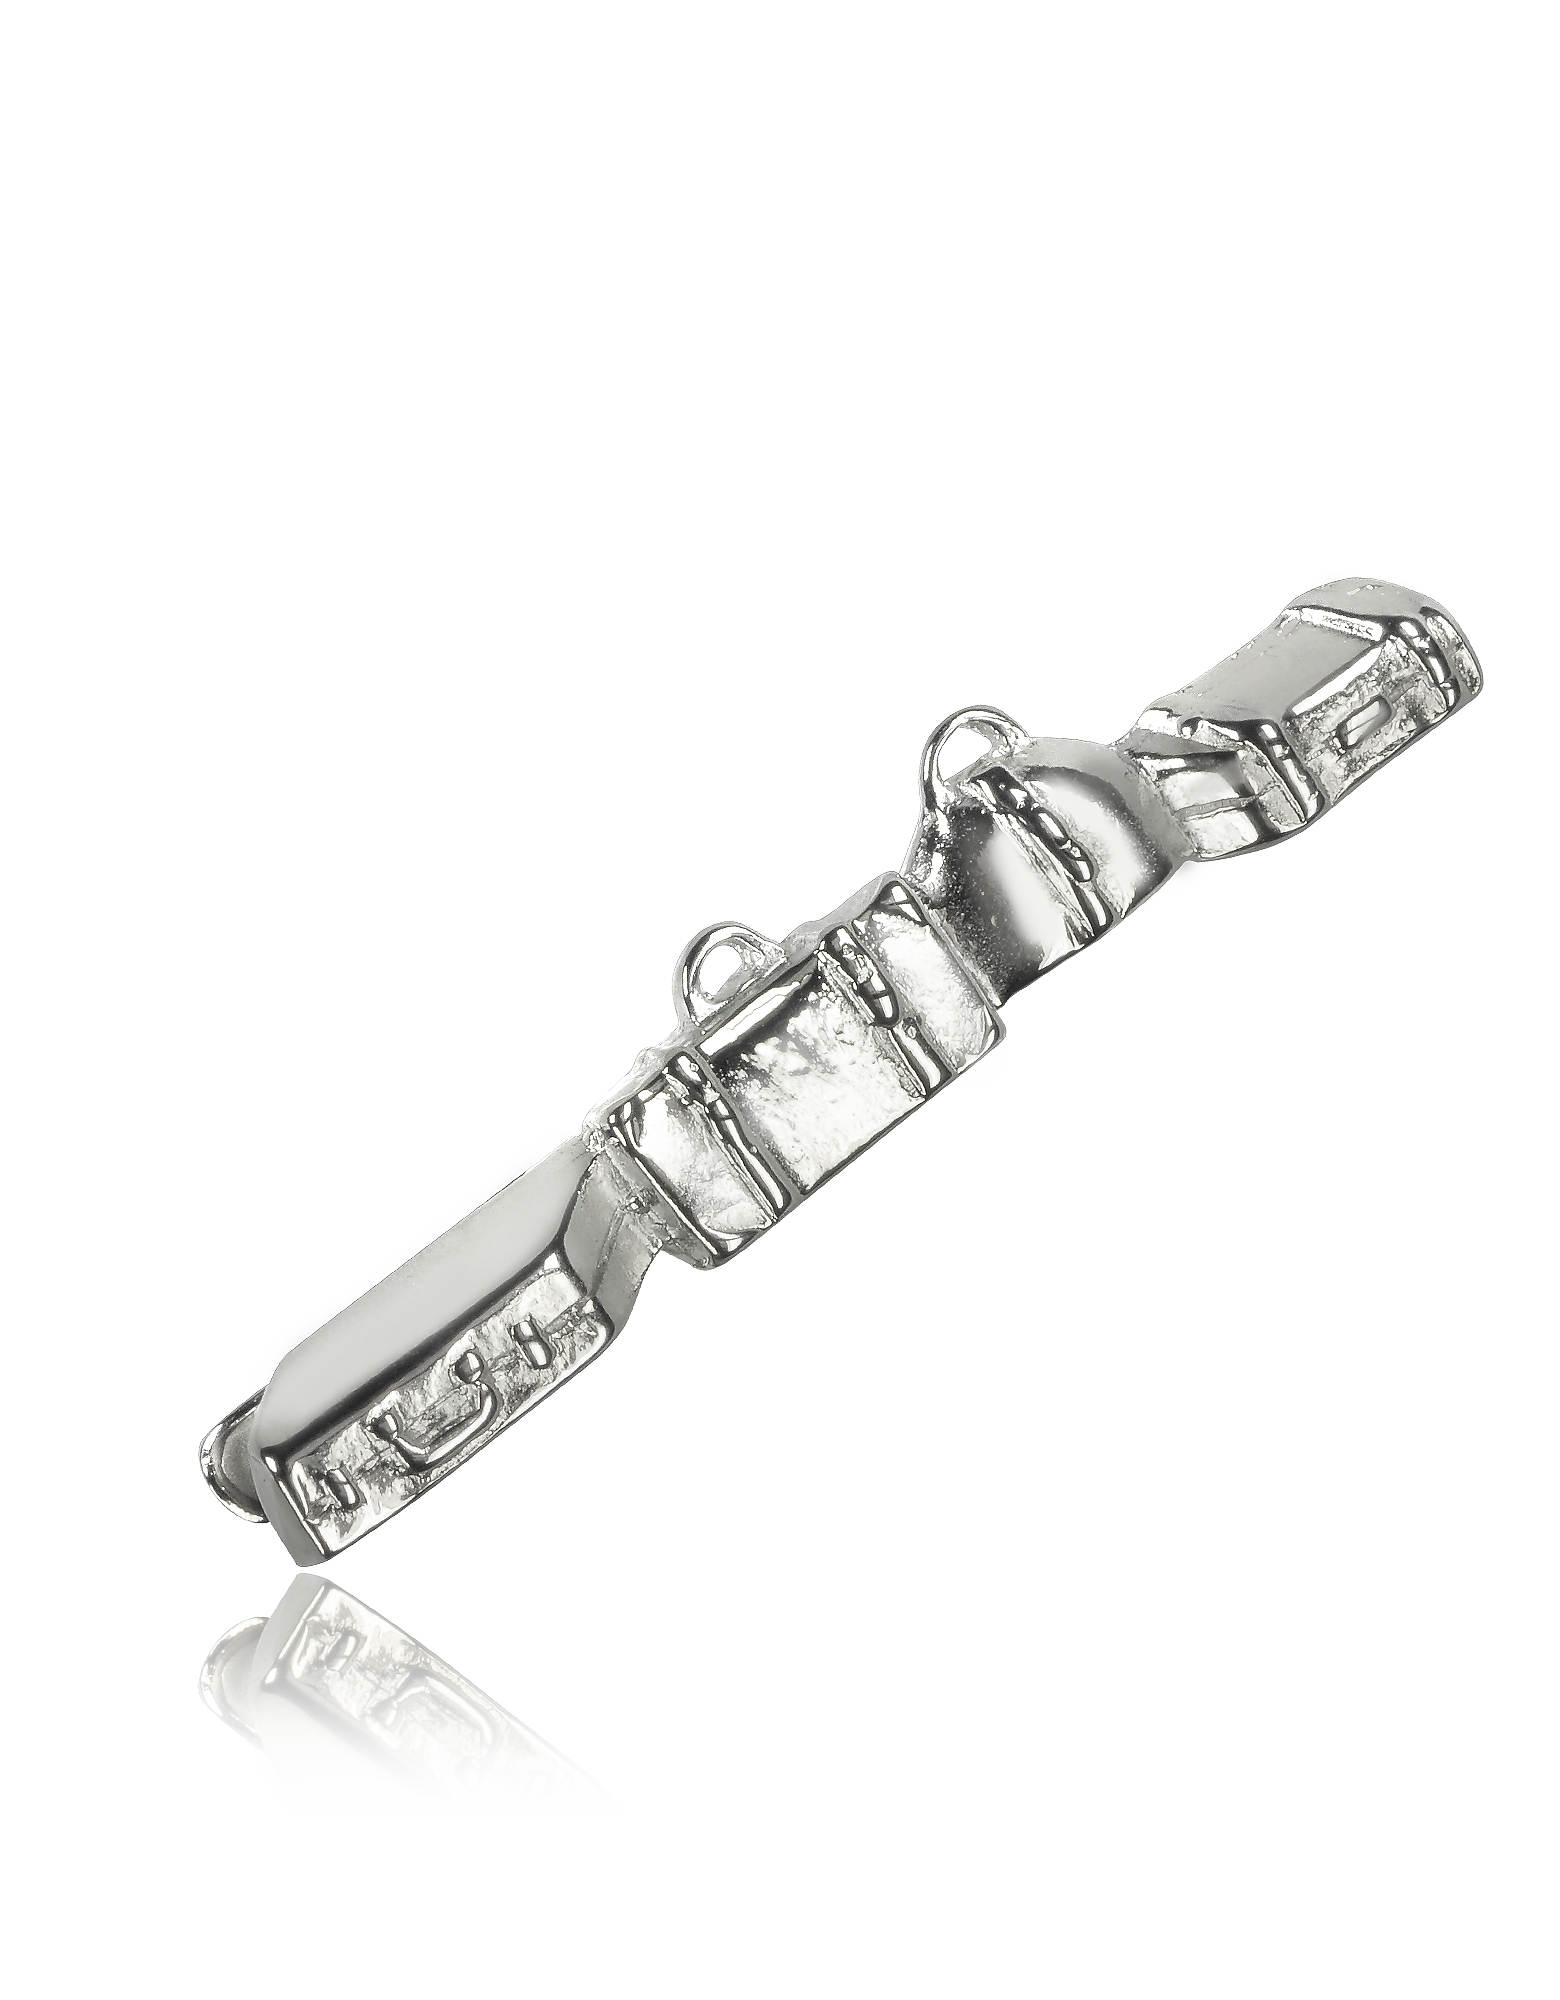 

Luggage Silver Plated Tie Clip